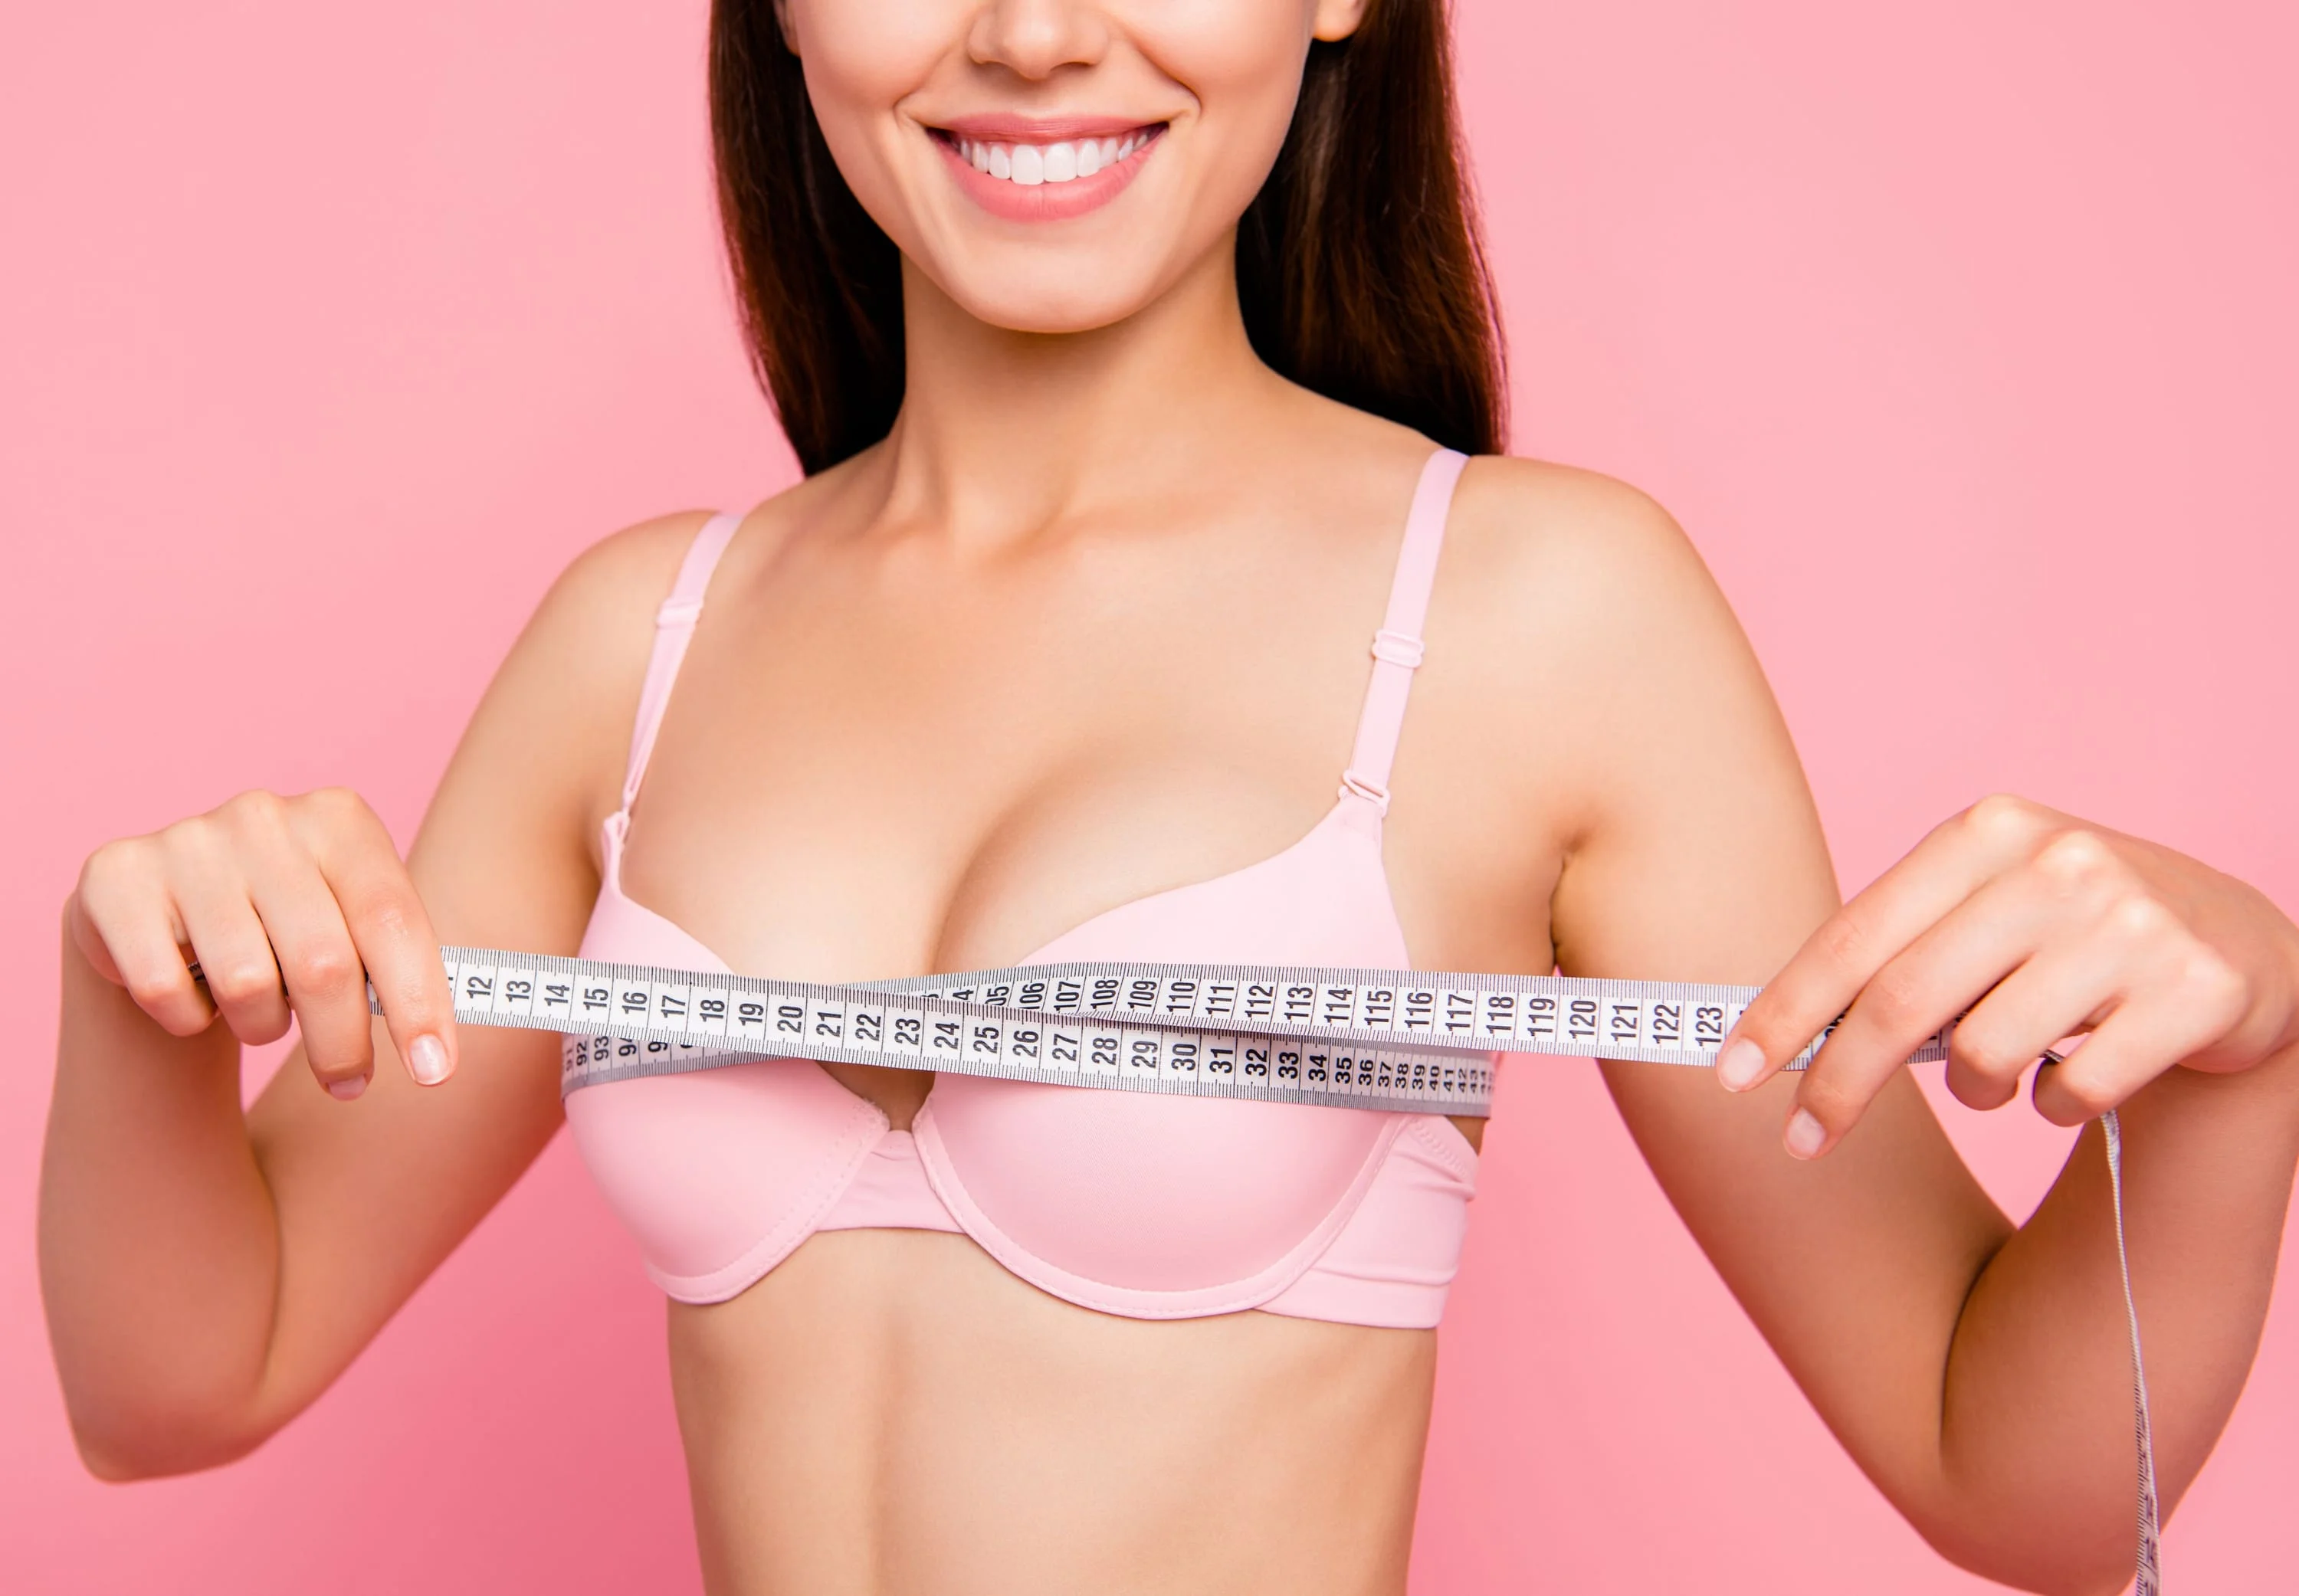 Breast Reduction Expectations